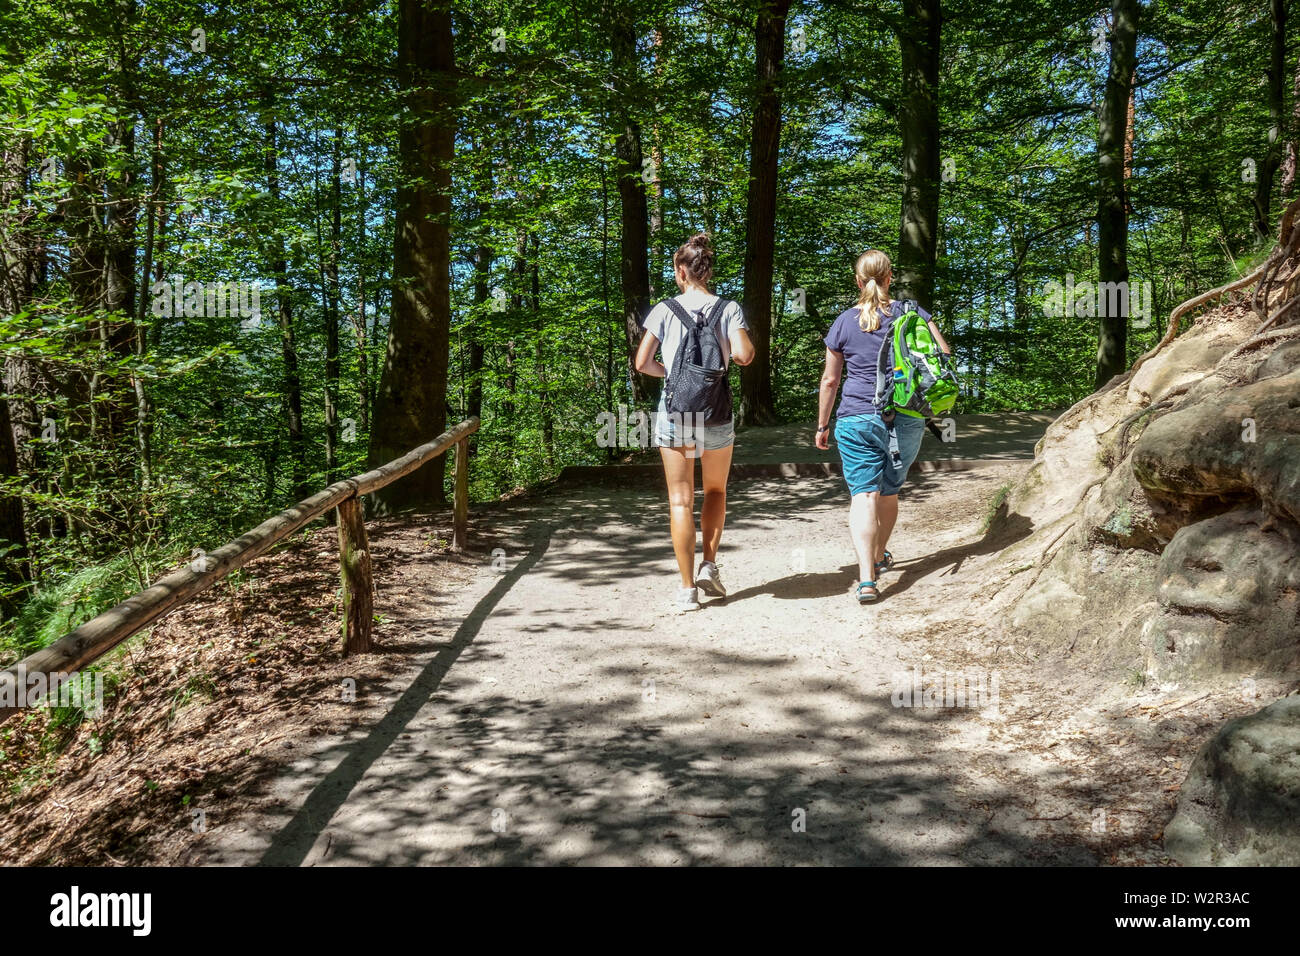 Two women hiking in Saxon Switzerland National Park, Germany hiking Europe walkers Hiker Germany summer mid-summer walk park Walking forest Stock Photo